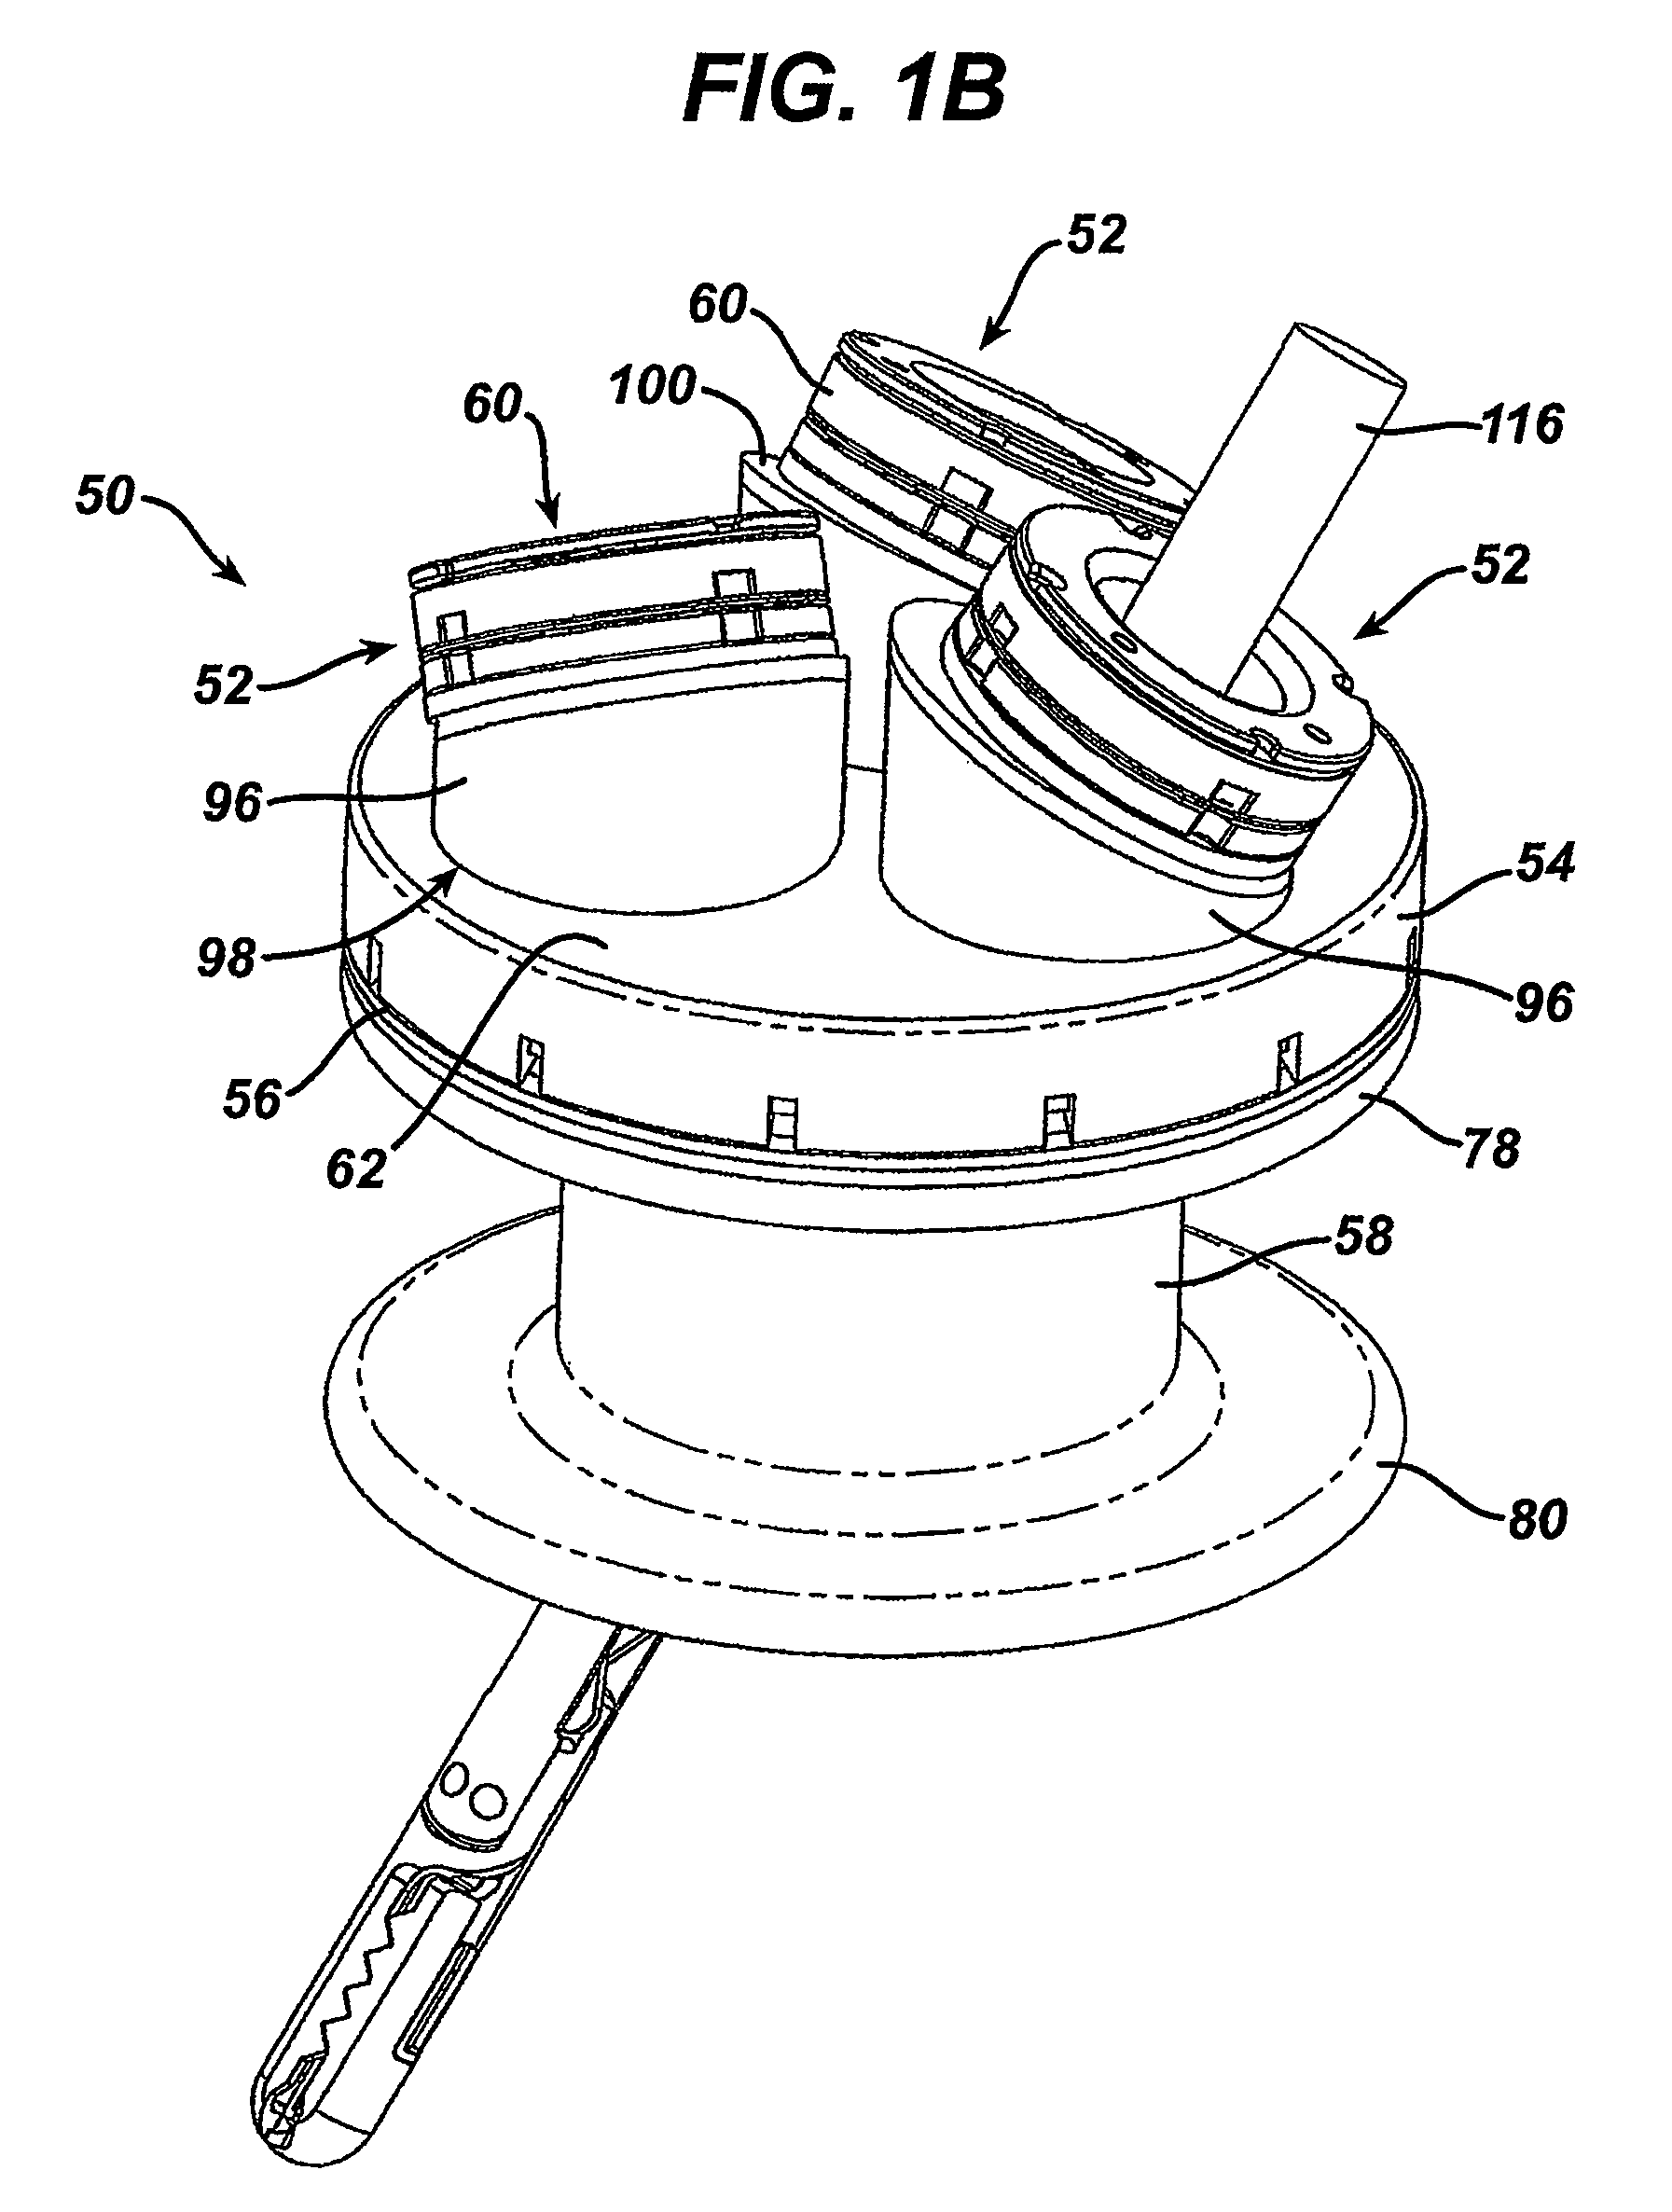 Multiple port surgical access device